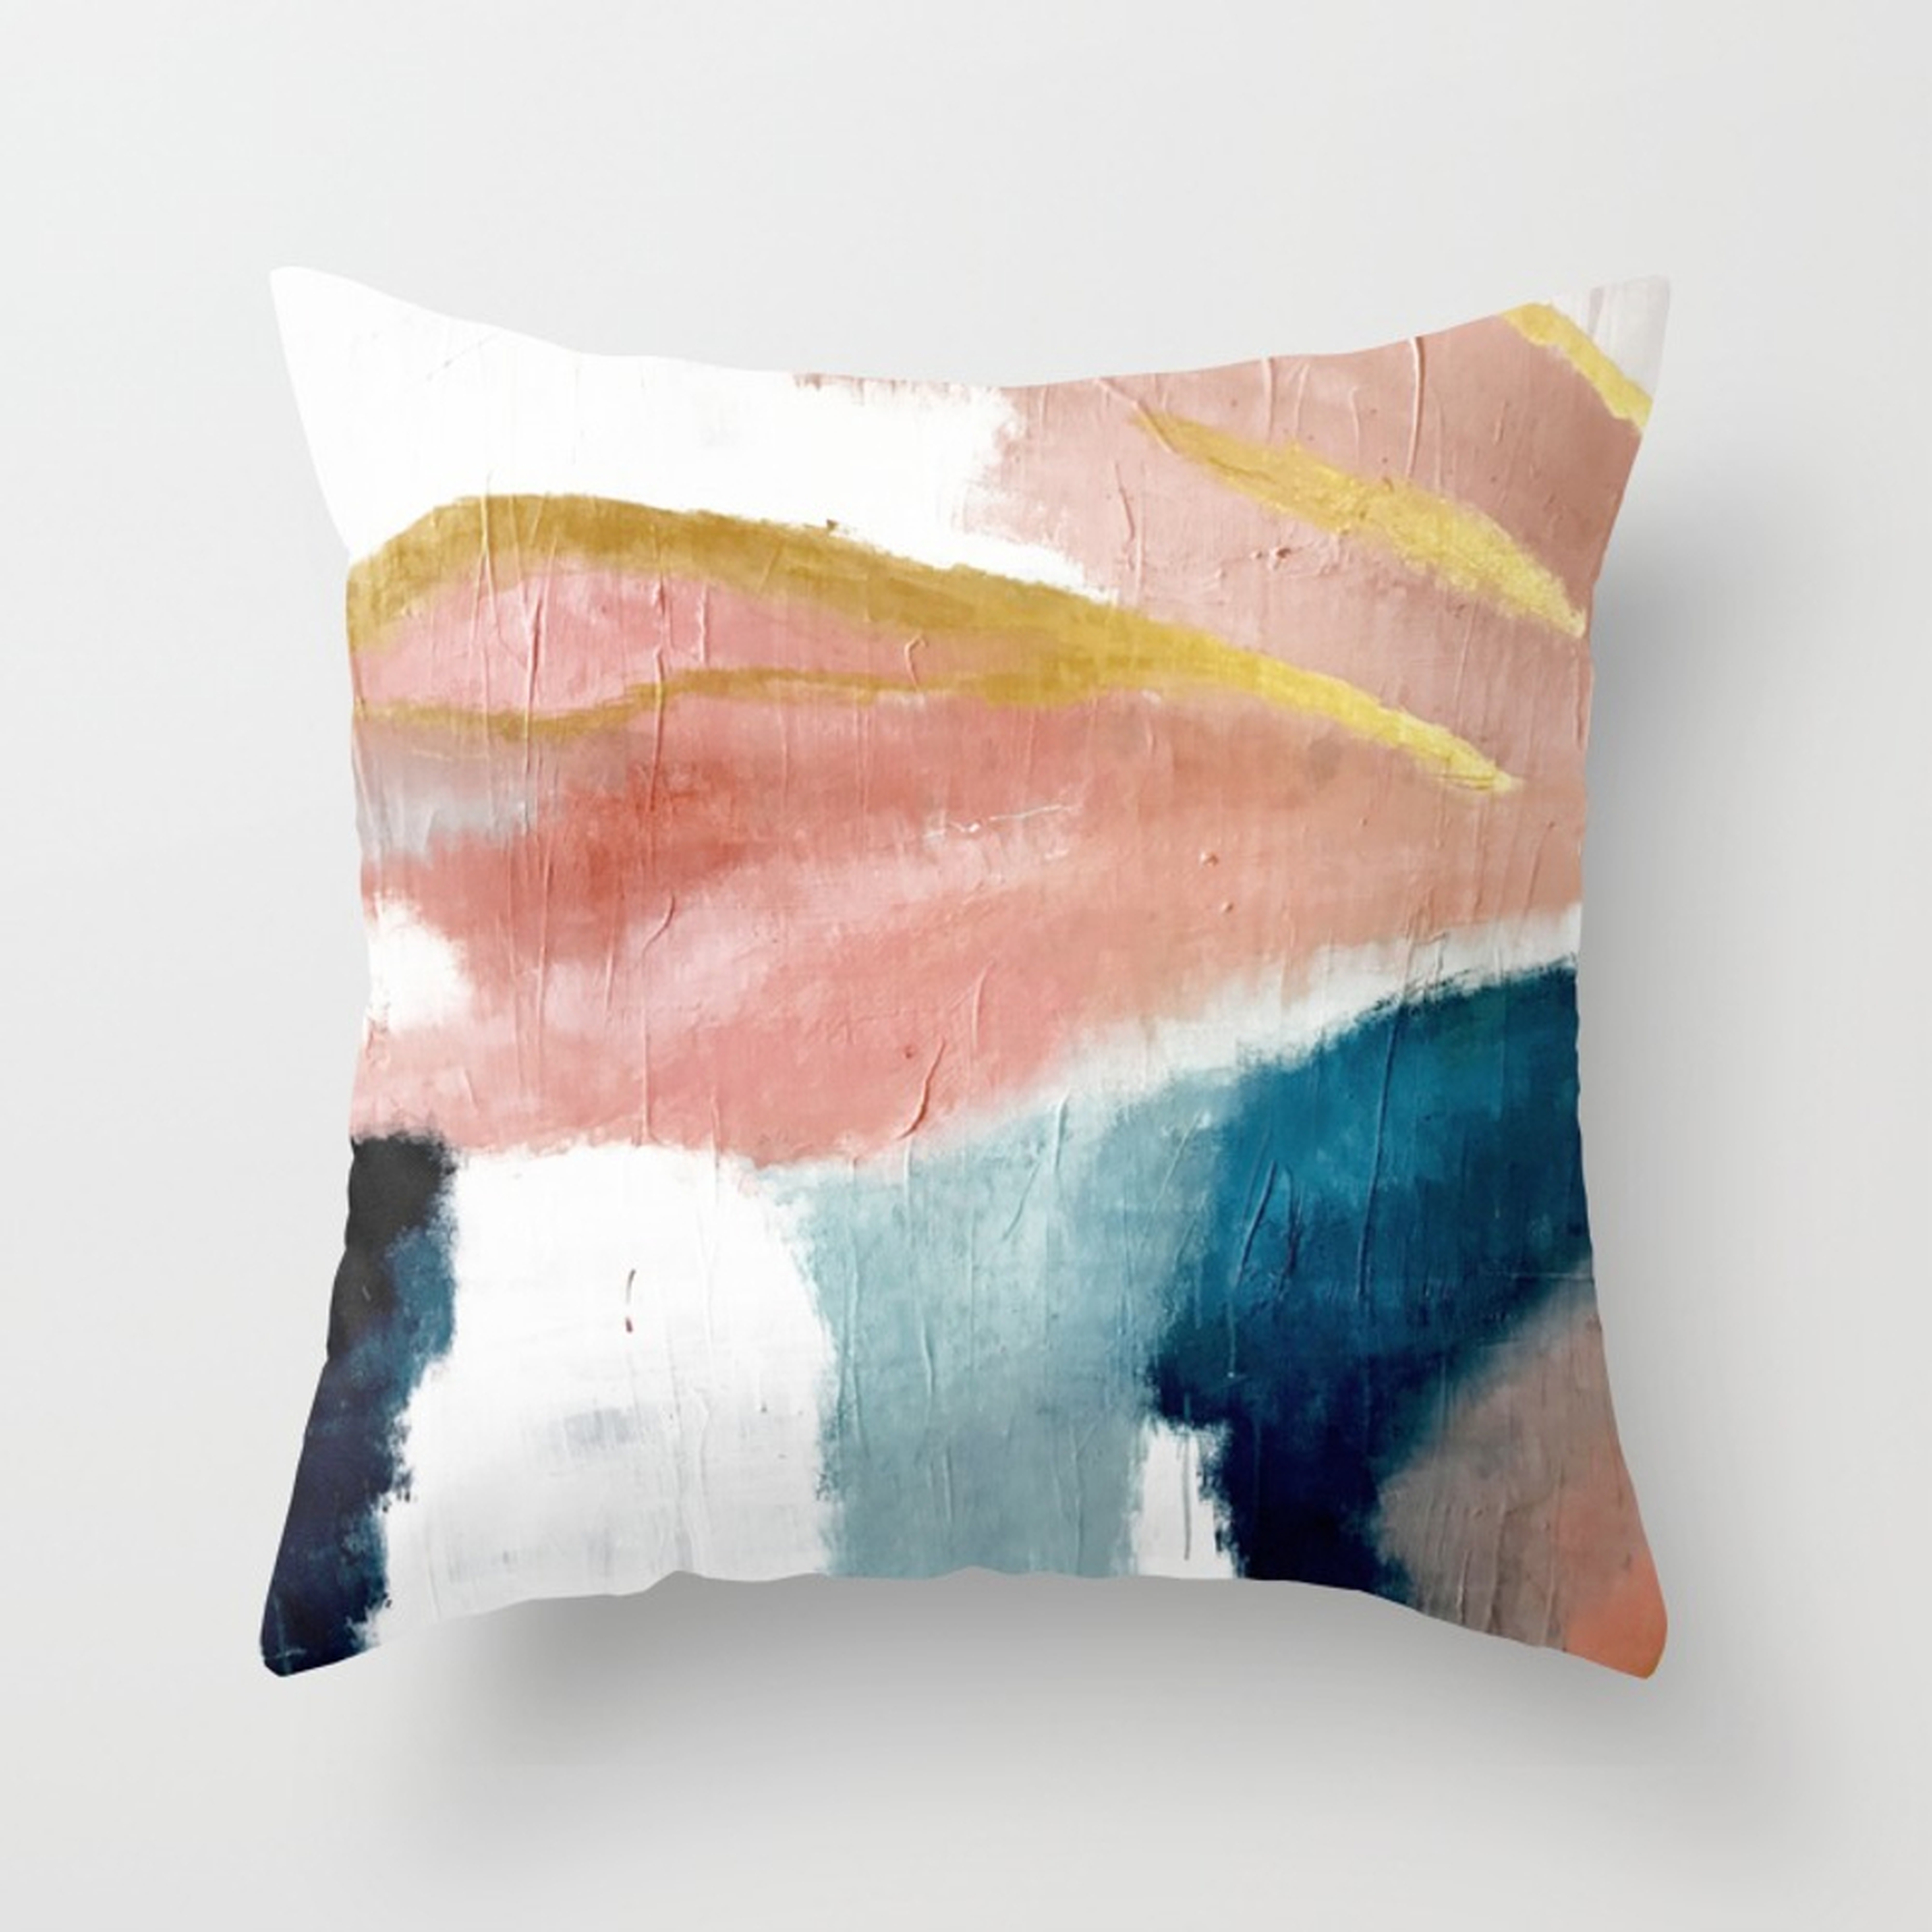 Exhale: a pretty, minimal, acrylic piece in pinks, blues, and gold Throw Pillow - Indoor Cover (16" x 16") with pillow insert by Blushingbrushstudio - Society6